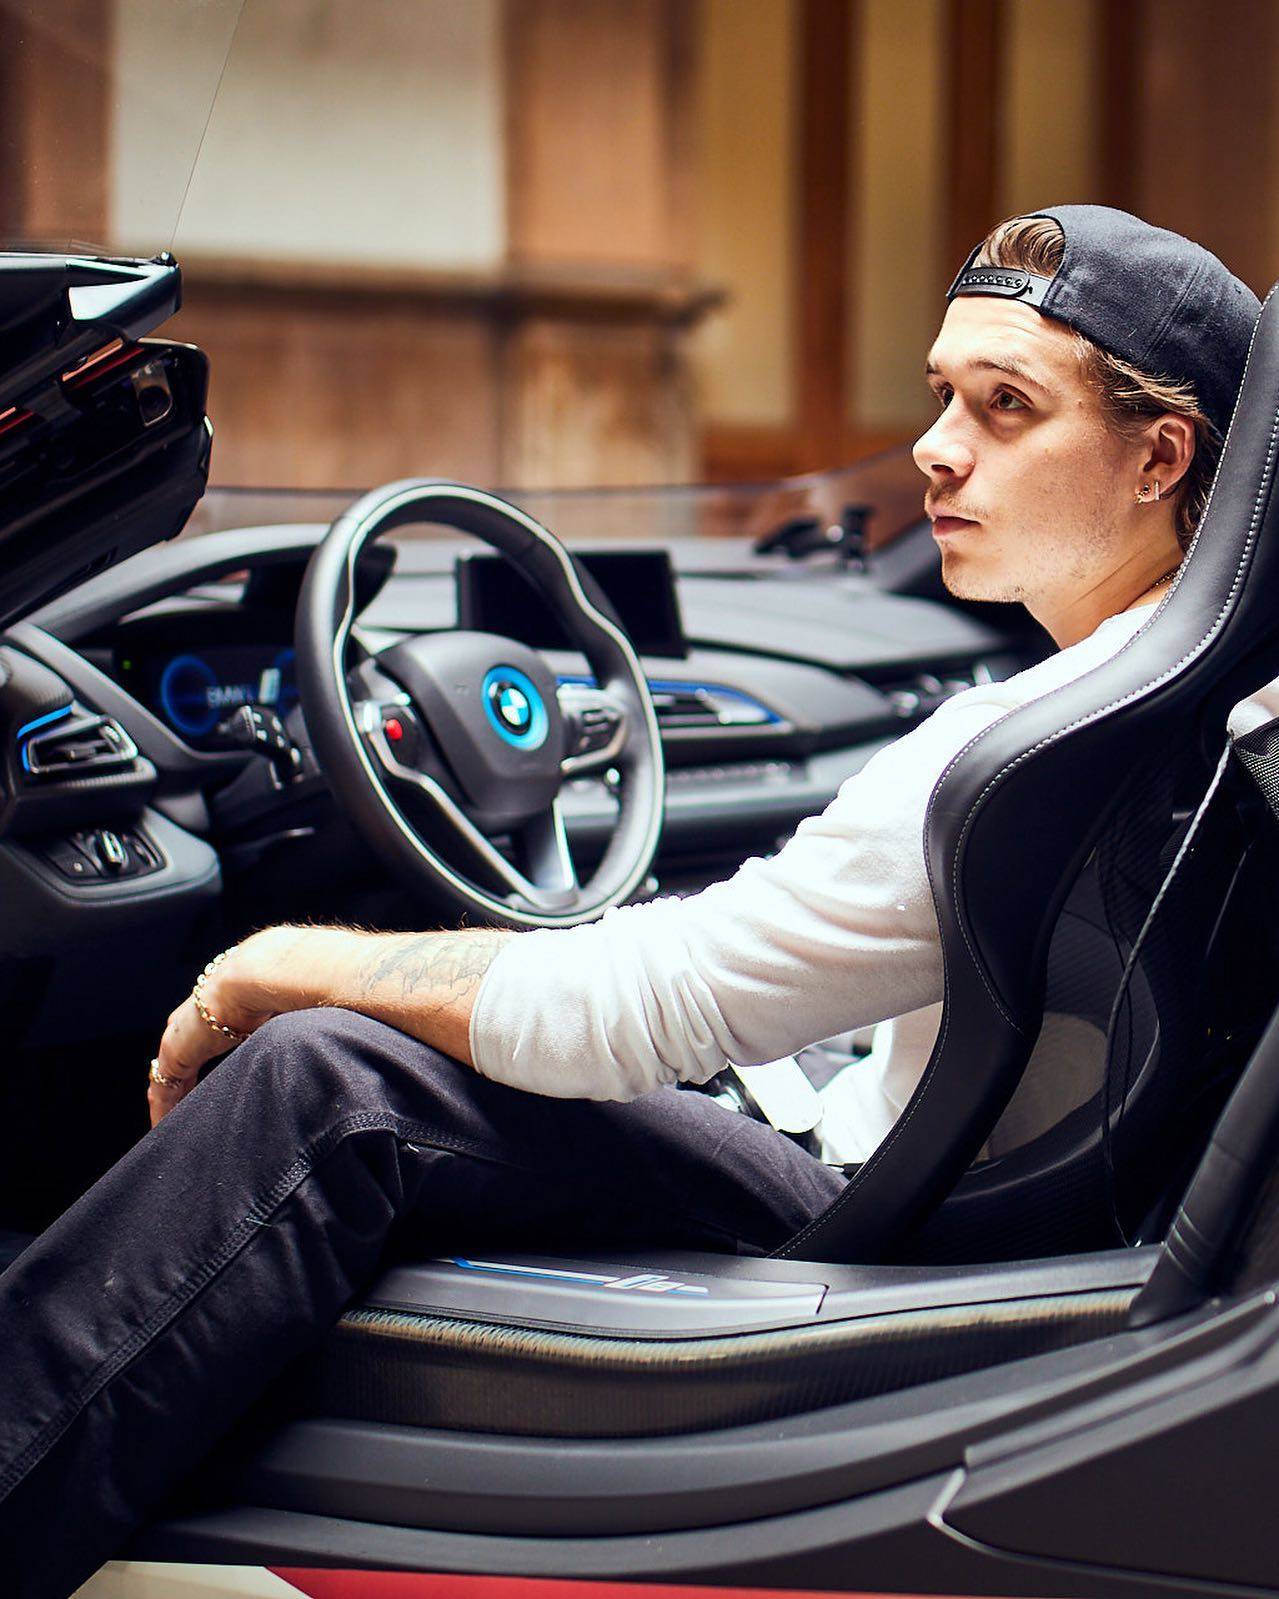 Take a closer look at all the luxurious cars that Brooklyn Beckham has got in his growing collection. Photo: @bmw